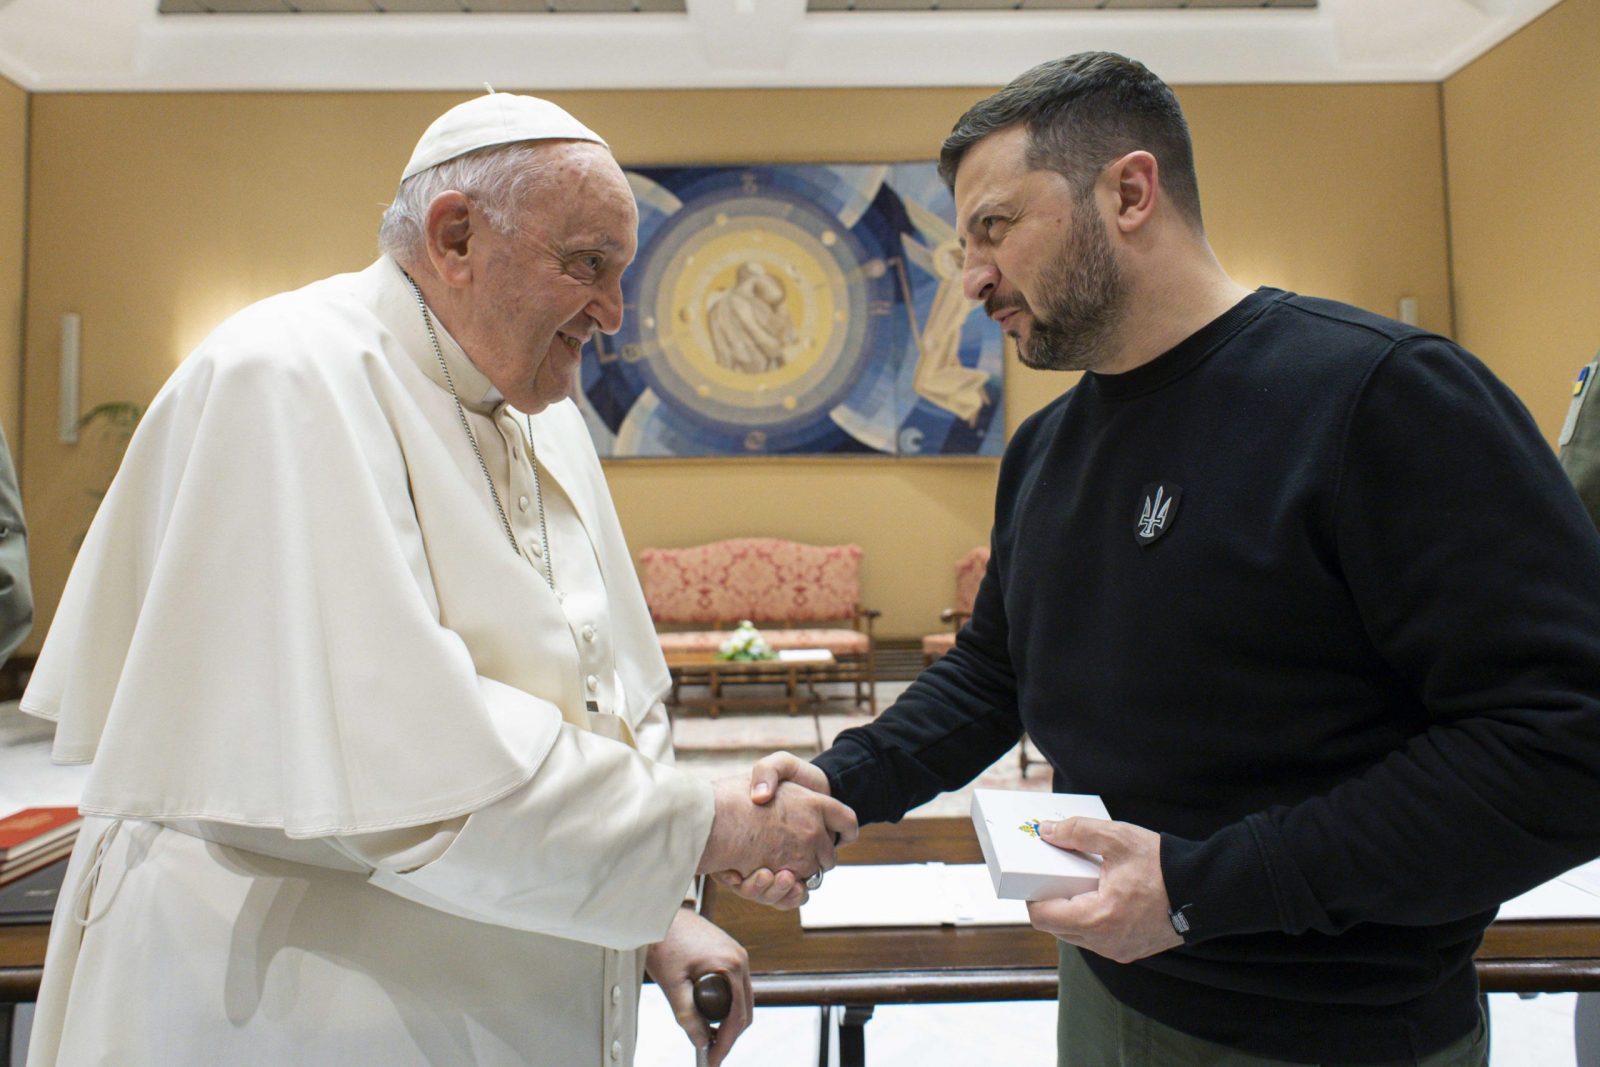 epa10625311 A handout picture provided by the Vatican Media shows Pope Francis (L) receiving Ukraine's President Volodymyr Zelensky during their meeting at the Vatican, 13 May 2023. It is the first time Zelensky visits Italy since the start of the Russian invasion of Ukraine in February 2022.  EPA/VATICAN MEDIA HANDOUT  HANDOUT EDITORIAL USE ONLY/NO SALES